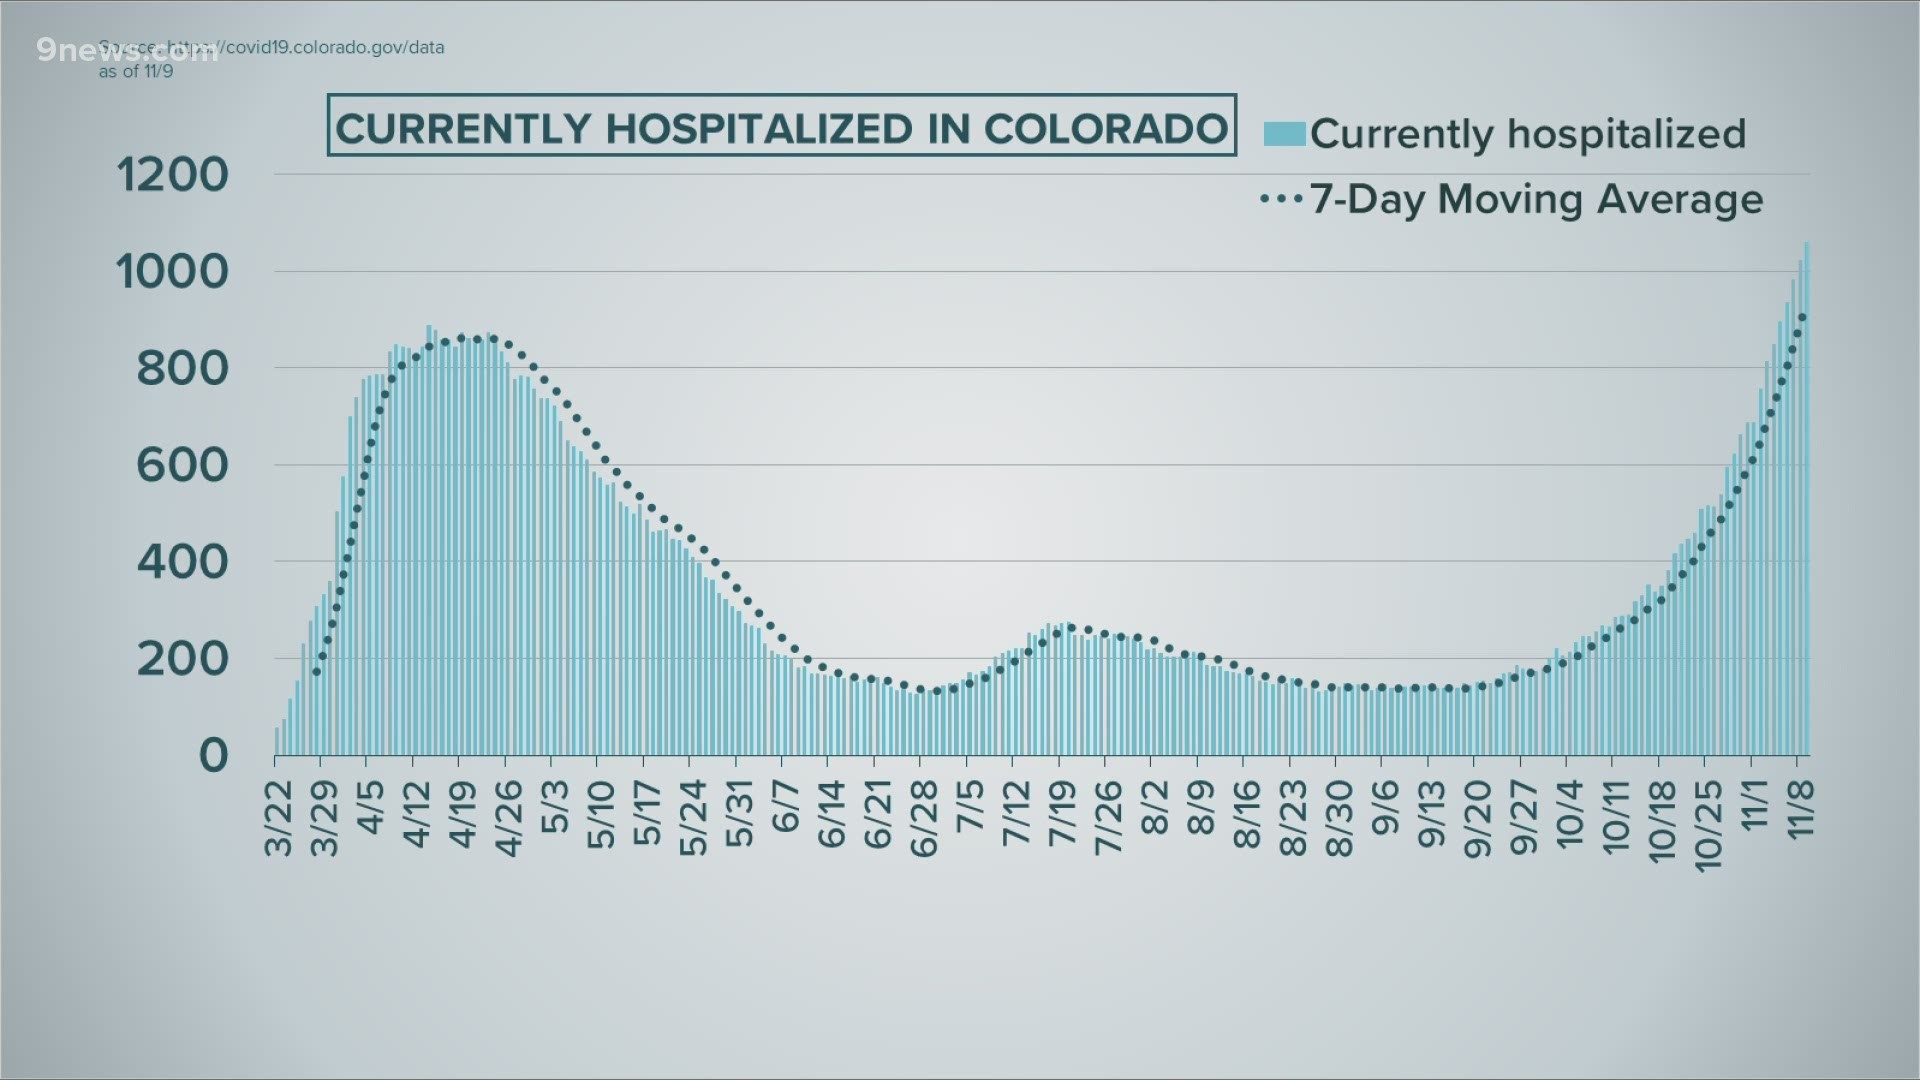 9health Expert Dr. Payal Kohli talks about recent COVID-19 hospital numbers and what they could mean for Colorado.